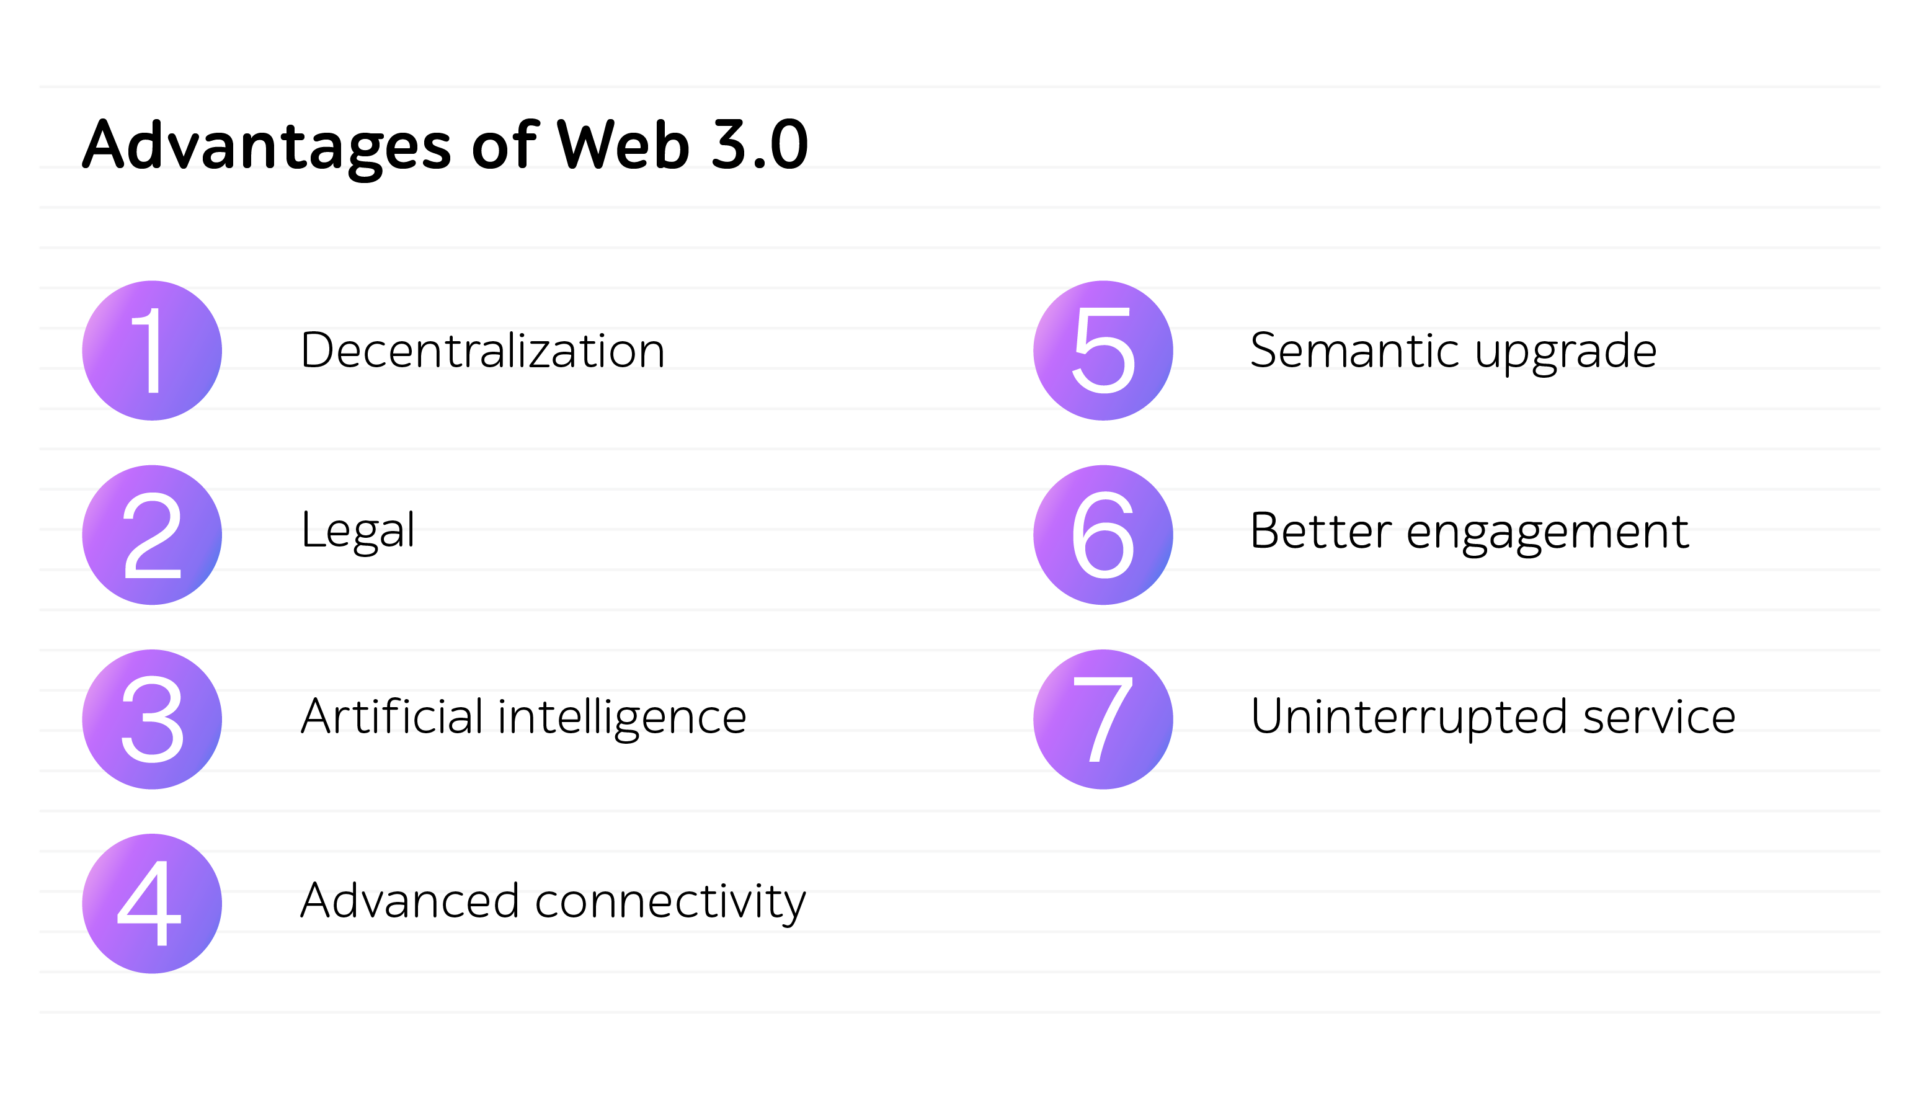 On the way to Web 3.0